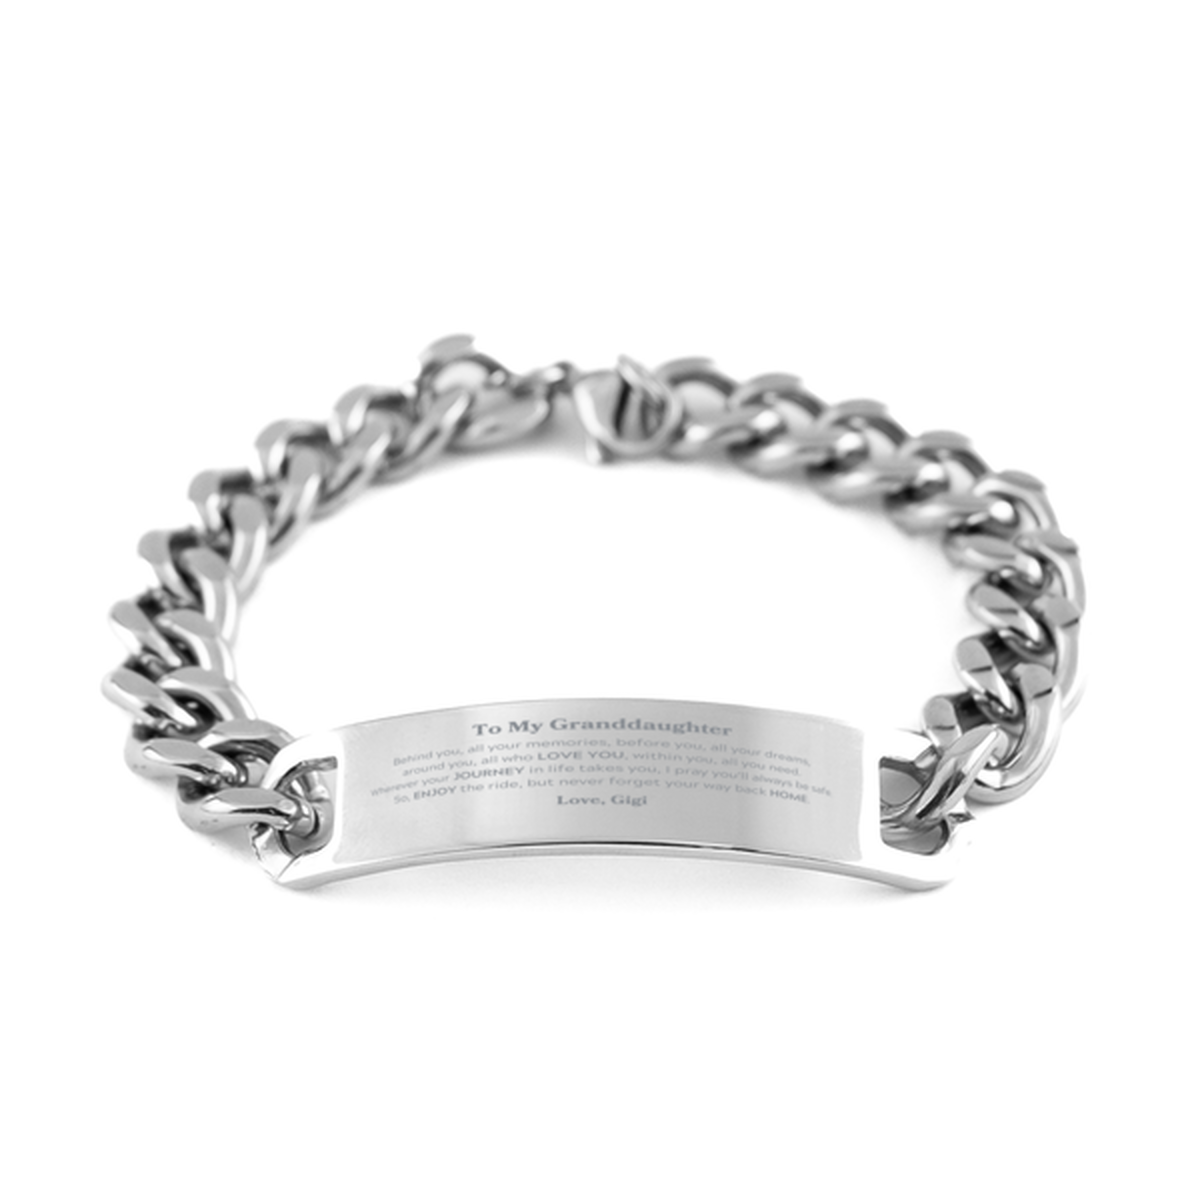 To My Granddaughter Graduation Gifts from Gigi, Granddaughter Cuban Chain Stainless Steel Bracelet Christmas Birthday Gifts for Granddaughter Behind you, all your memories, before you, all your dreams. Love, Gigi